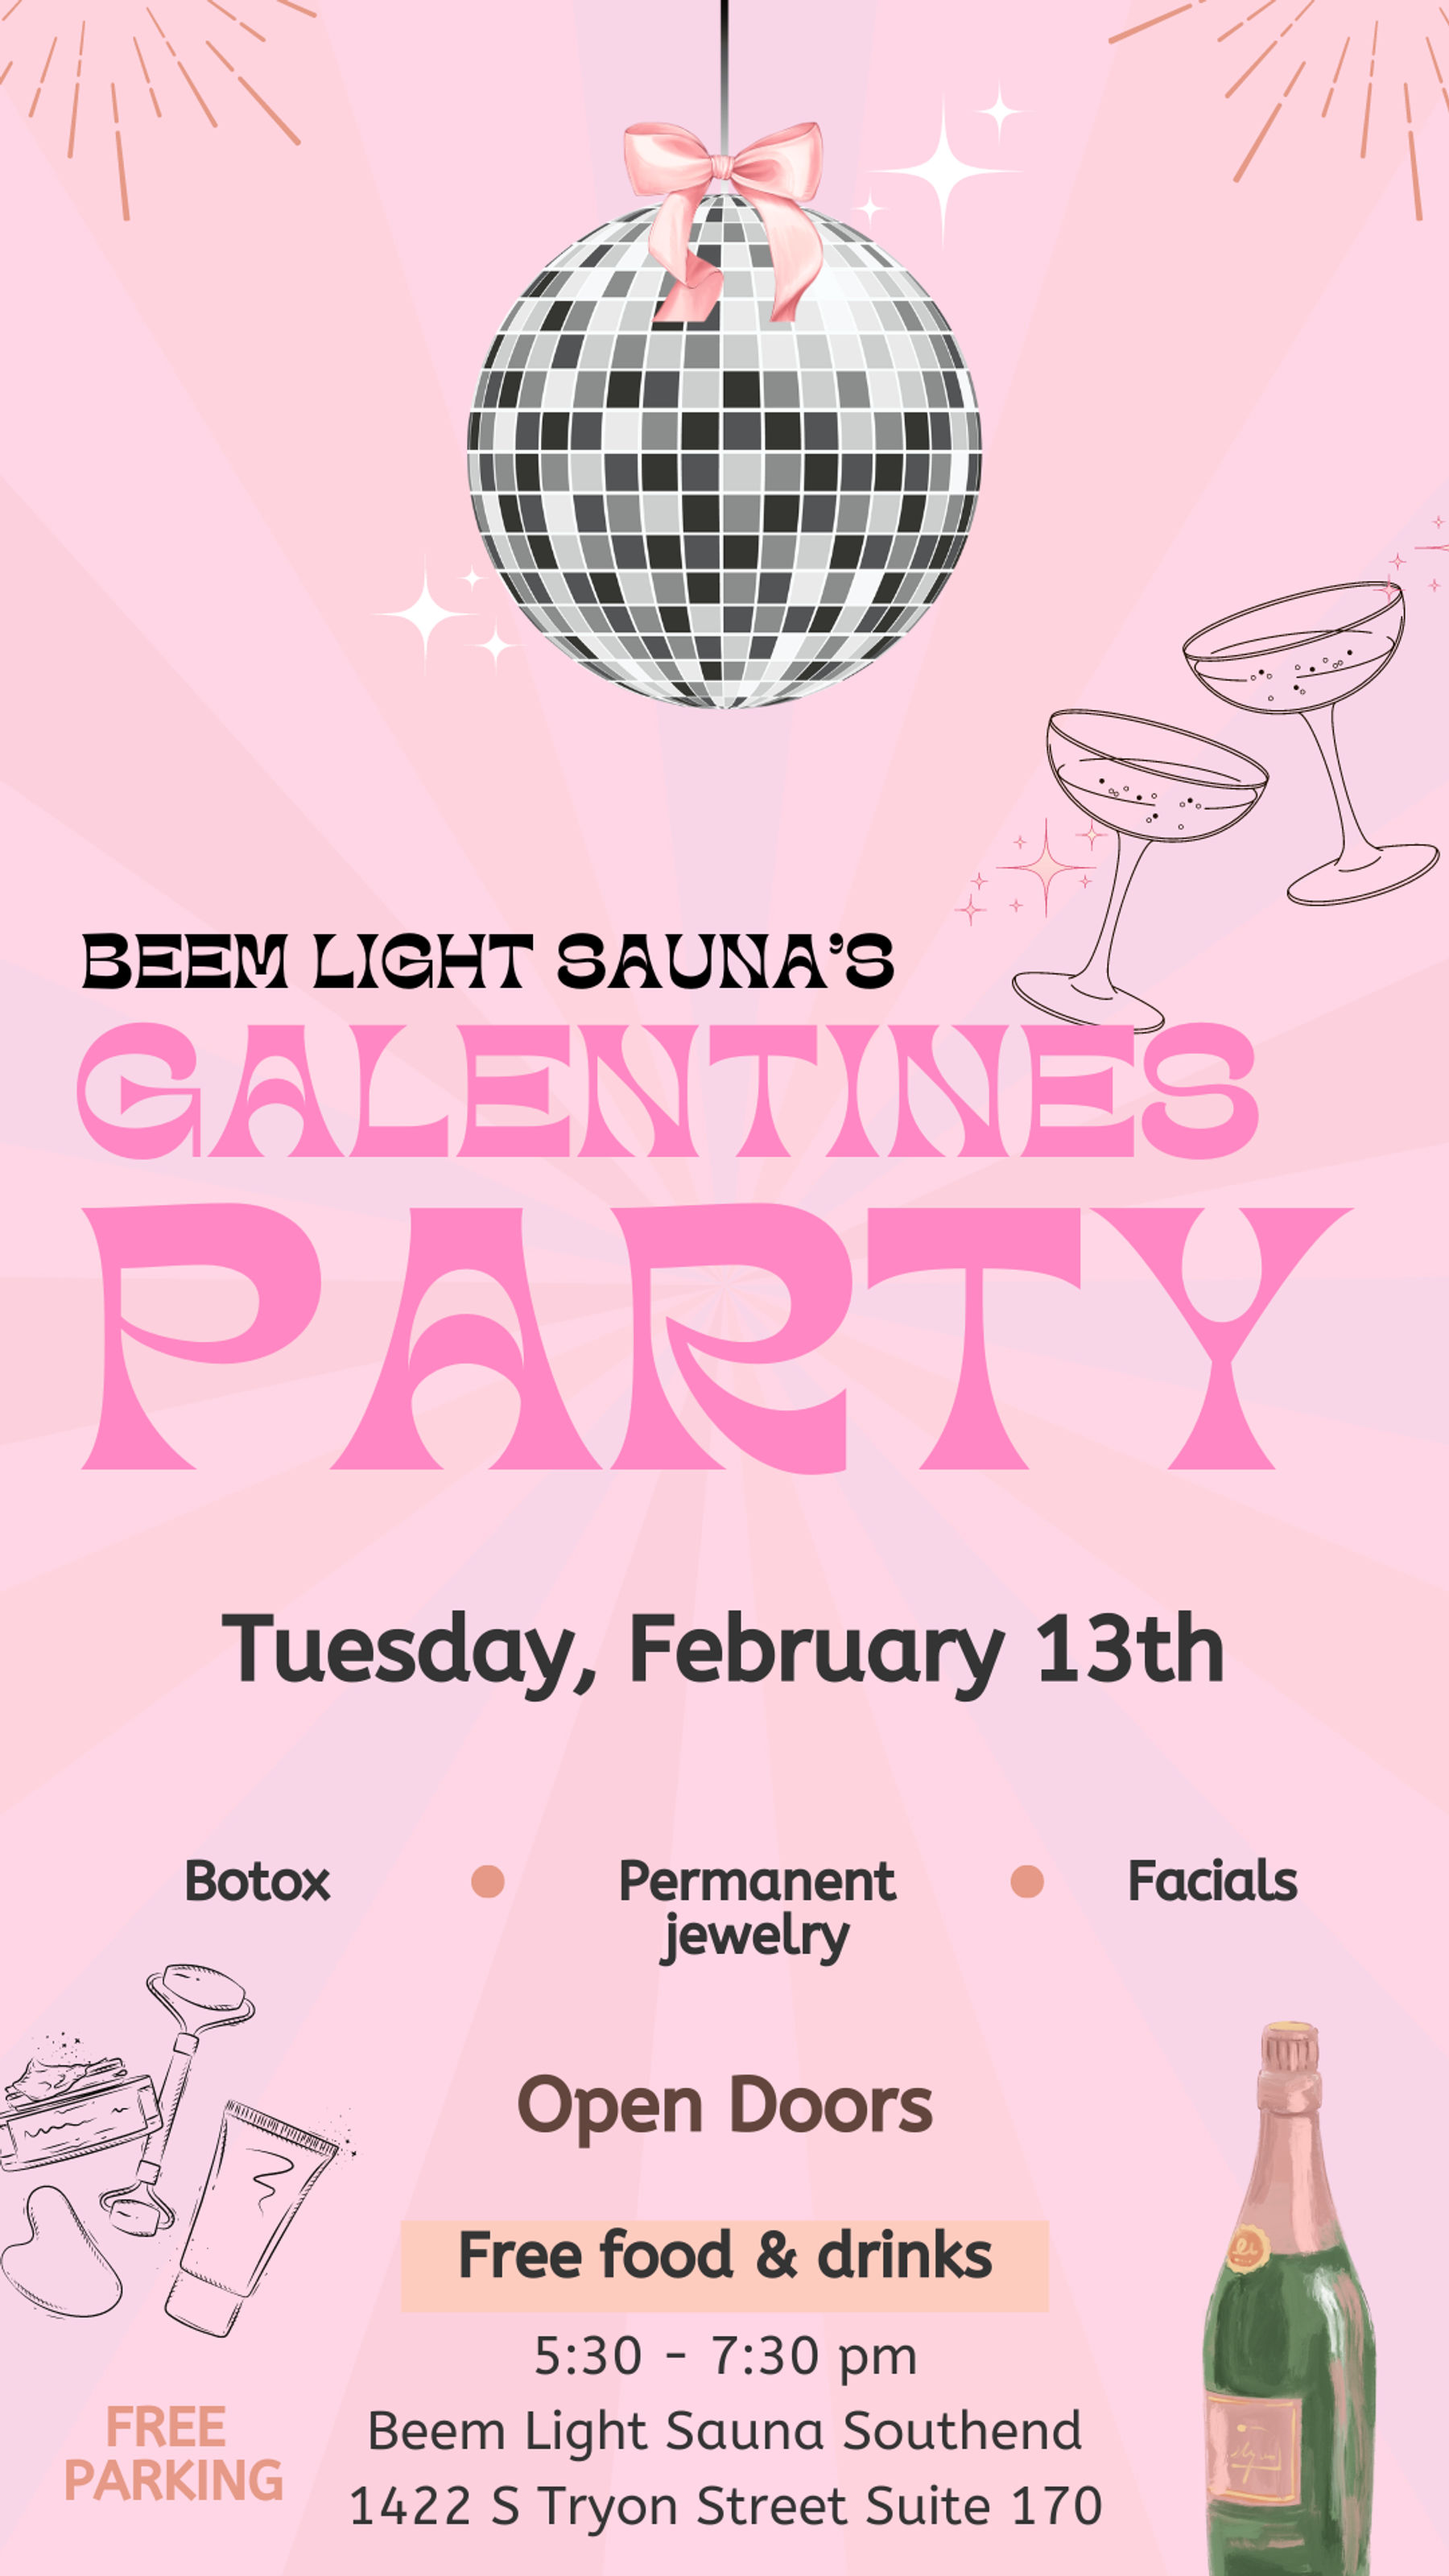 Galentines party | South End Charlotte